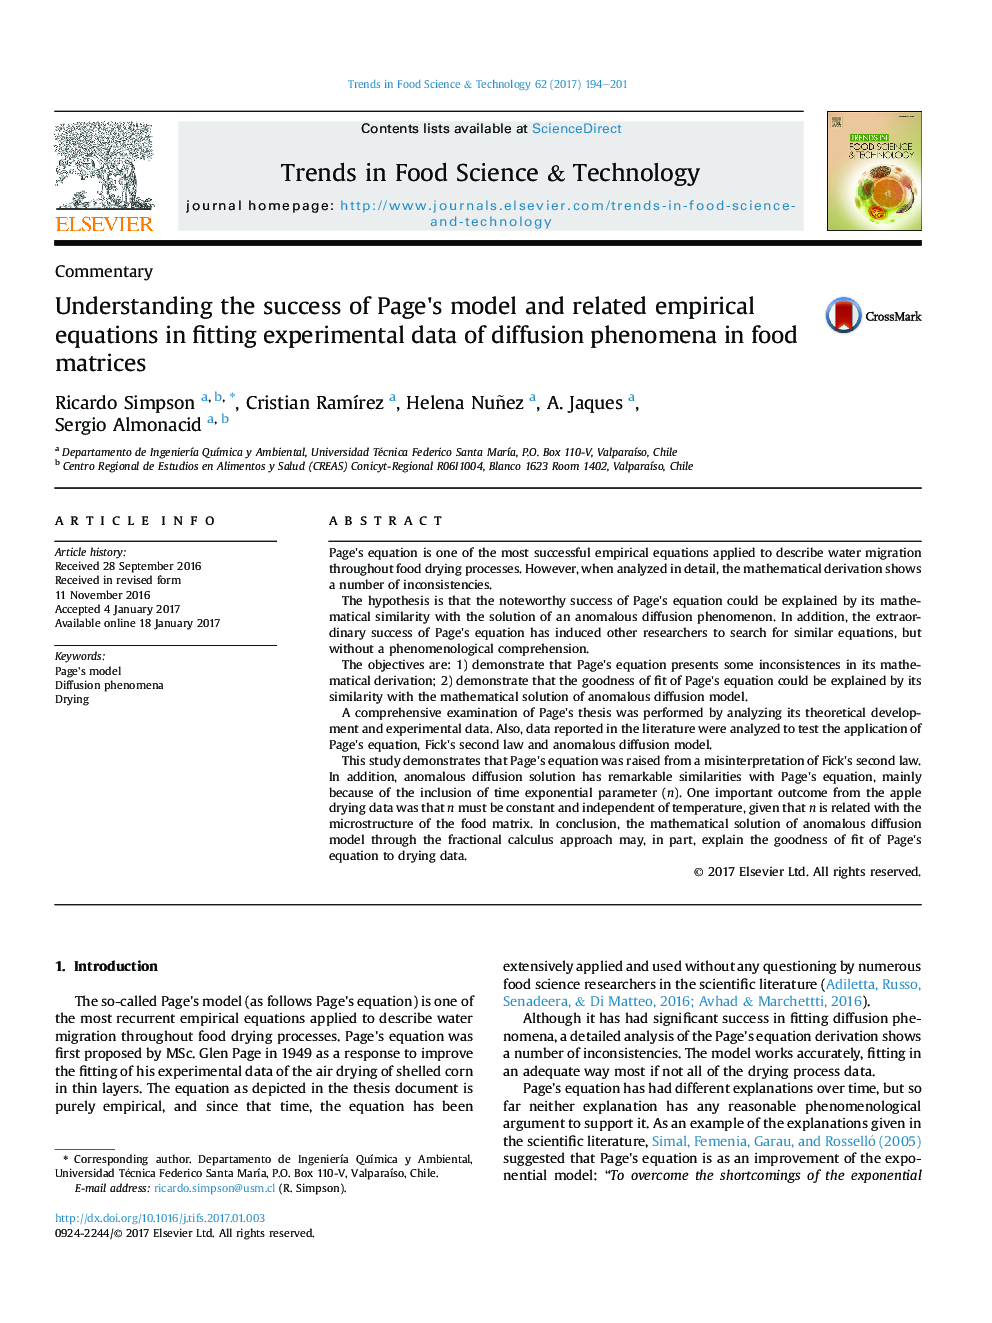 CommentaryUnderstanding the success of Page's model and related empirical equations in fitting experimental data of diffusion phenomena in food matrices